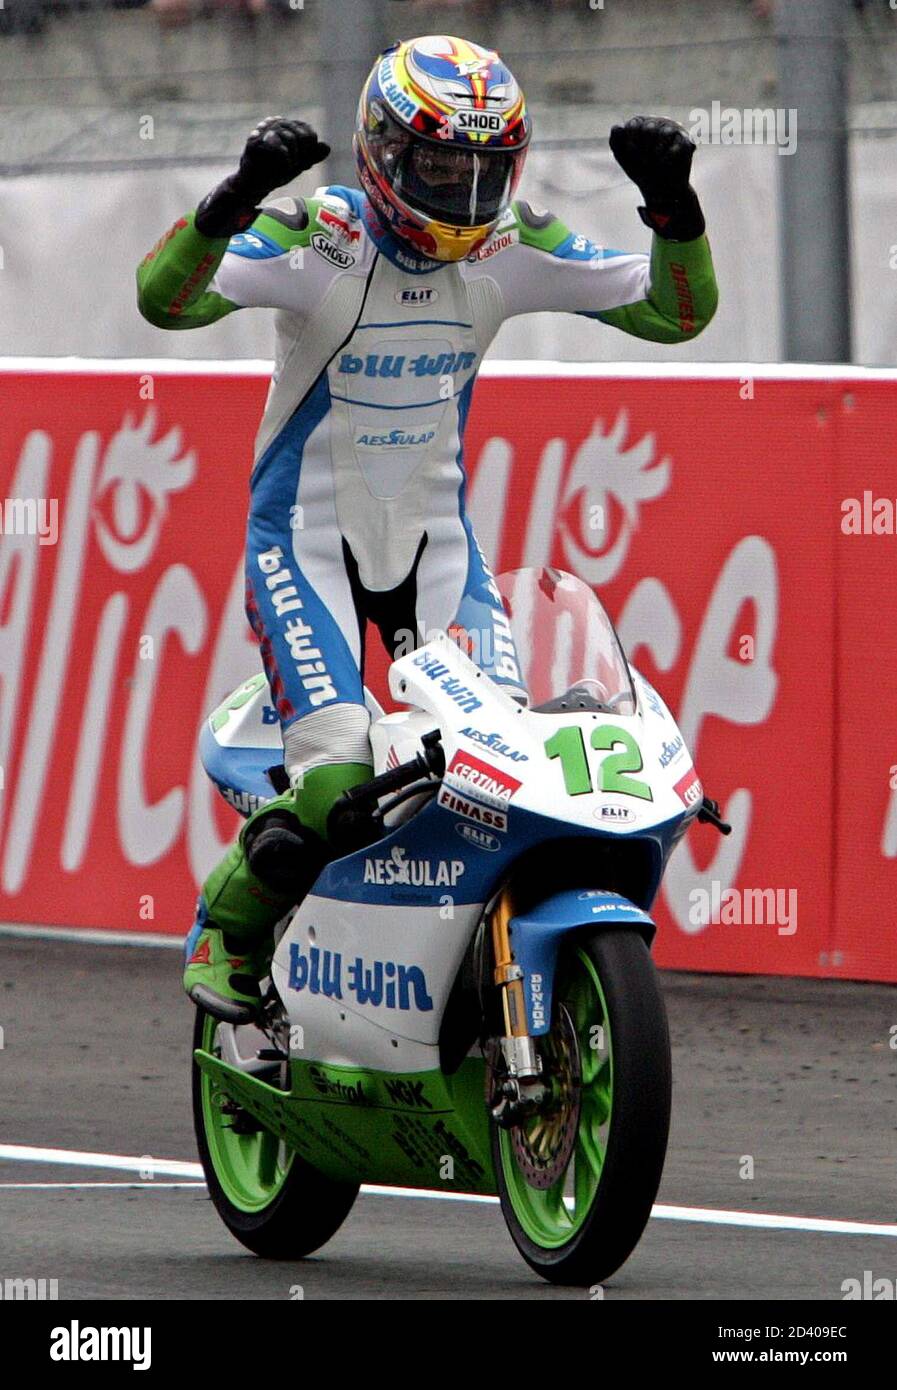 Honda 125cc rider Thomas Luthi of Switzerland celebrates victory in the  French Grand Prix at the Le Mans circuit in central France. Honda 125cc  rider Thomas Luthi of Switzerland celebrates victory in